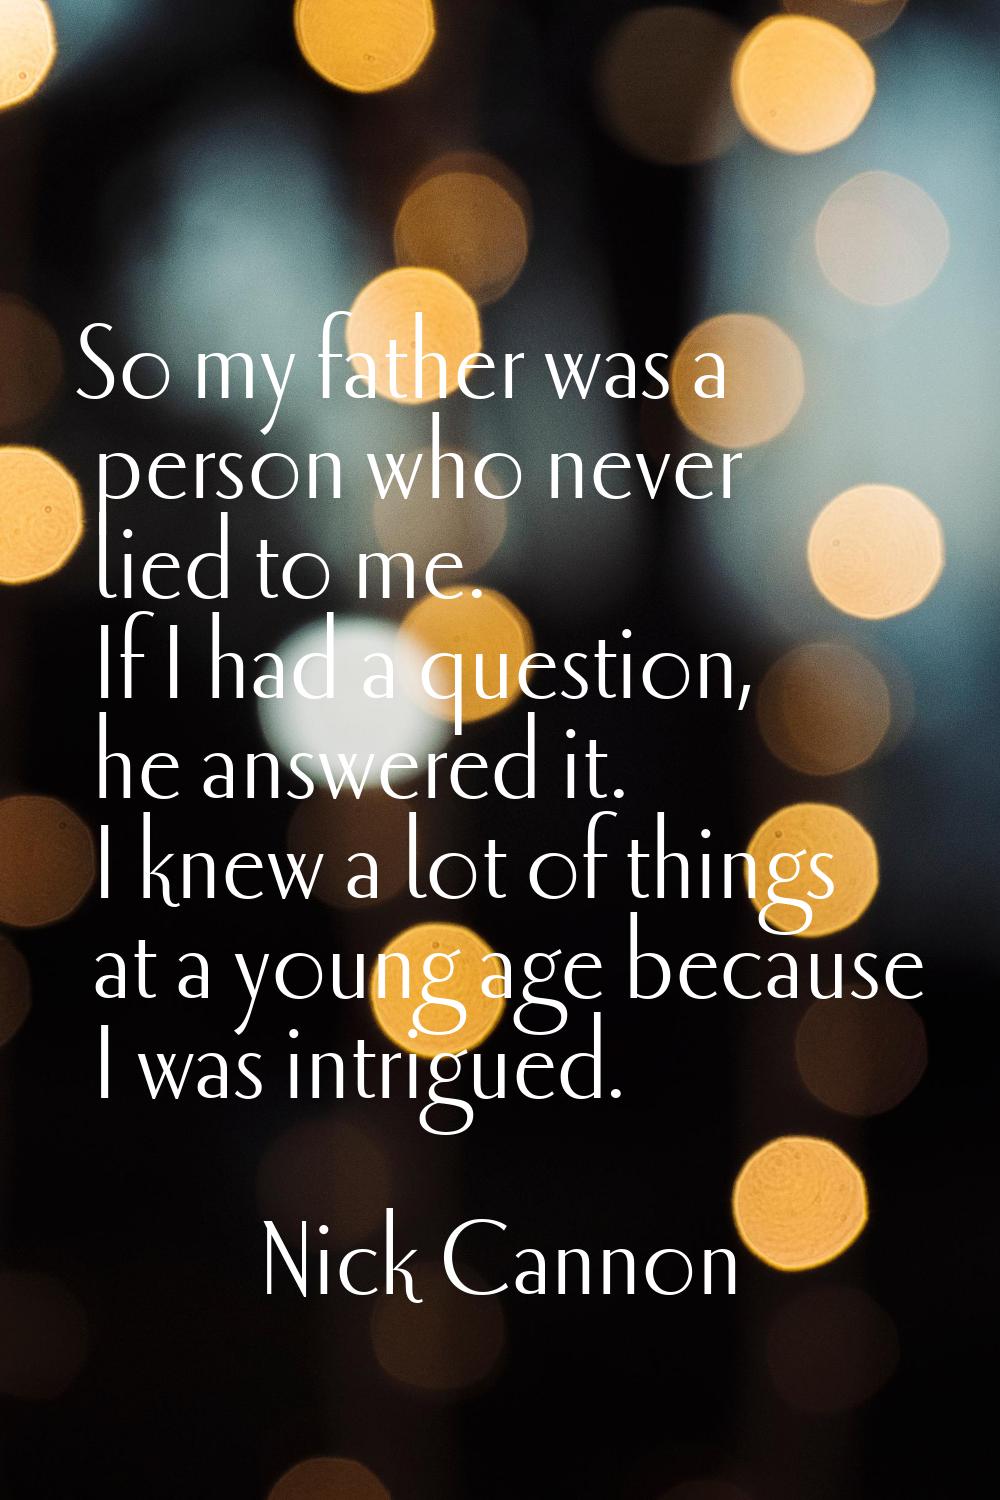 So my father was a person who never lied to me. If I had a question, he answered it. I knew a lot o